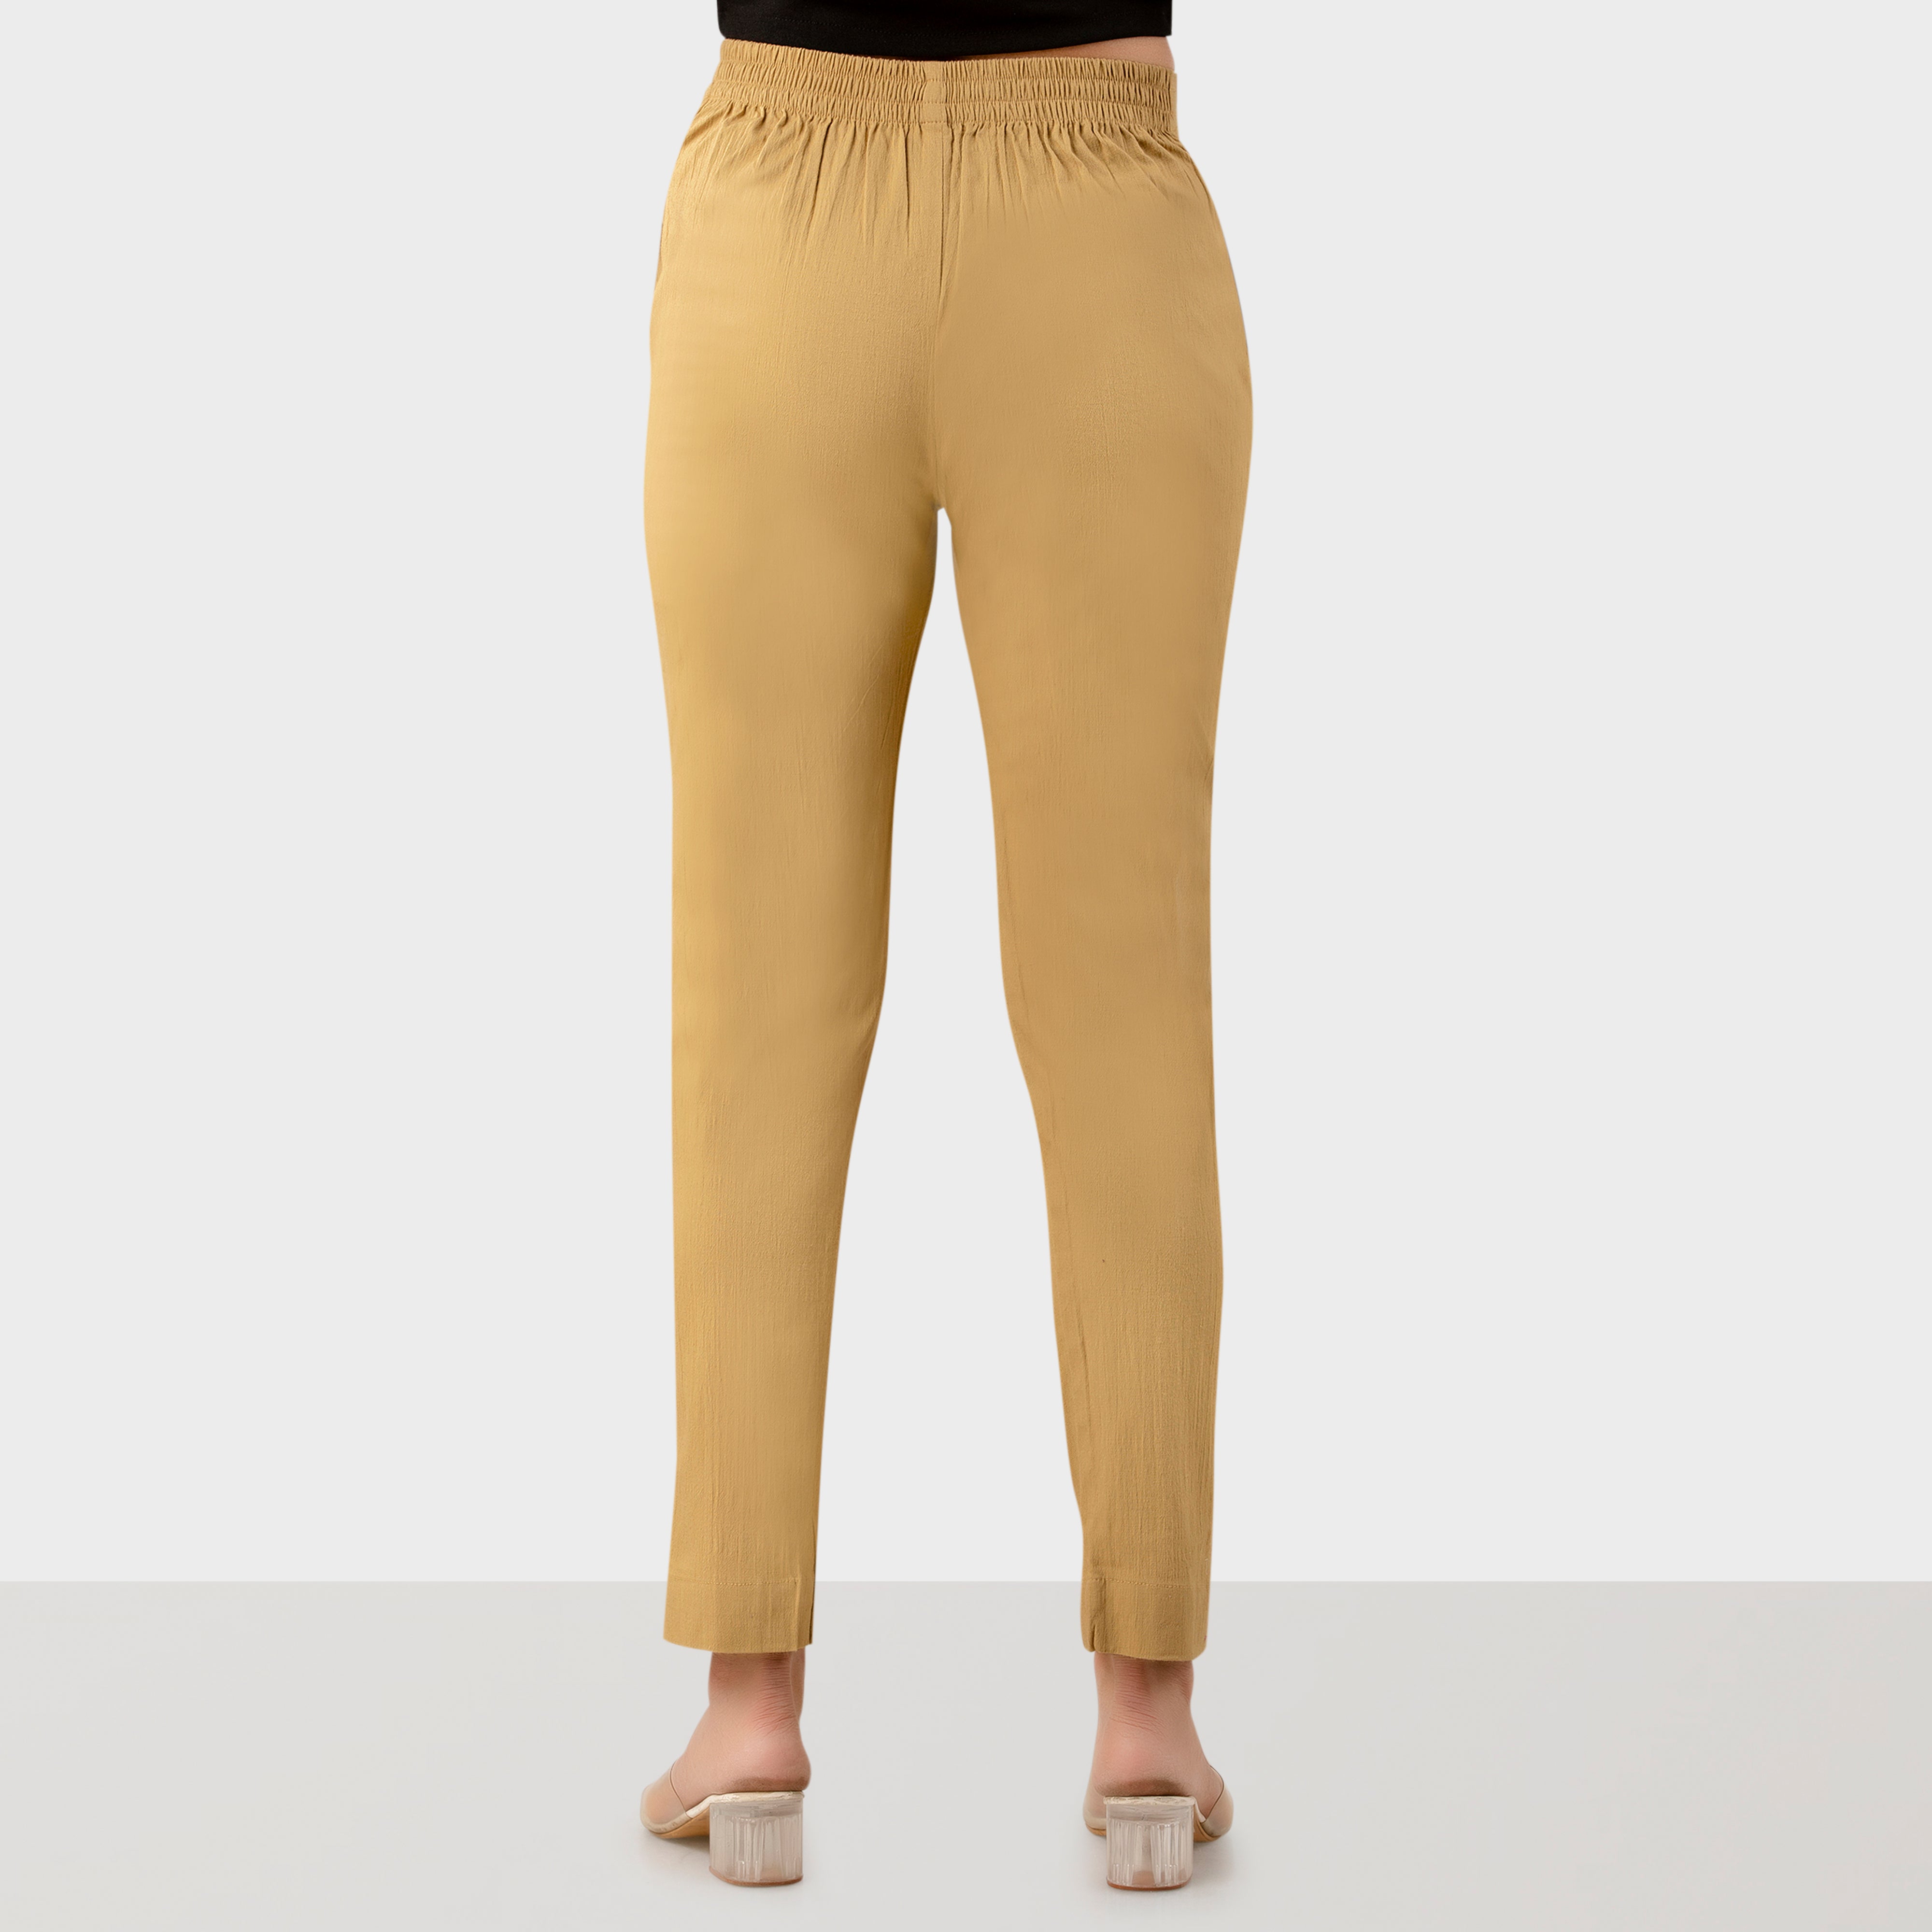 Printed Trousers - Golden - women - 9 products | FASHIOLA INDIA